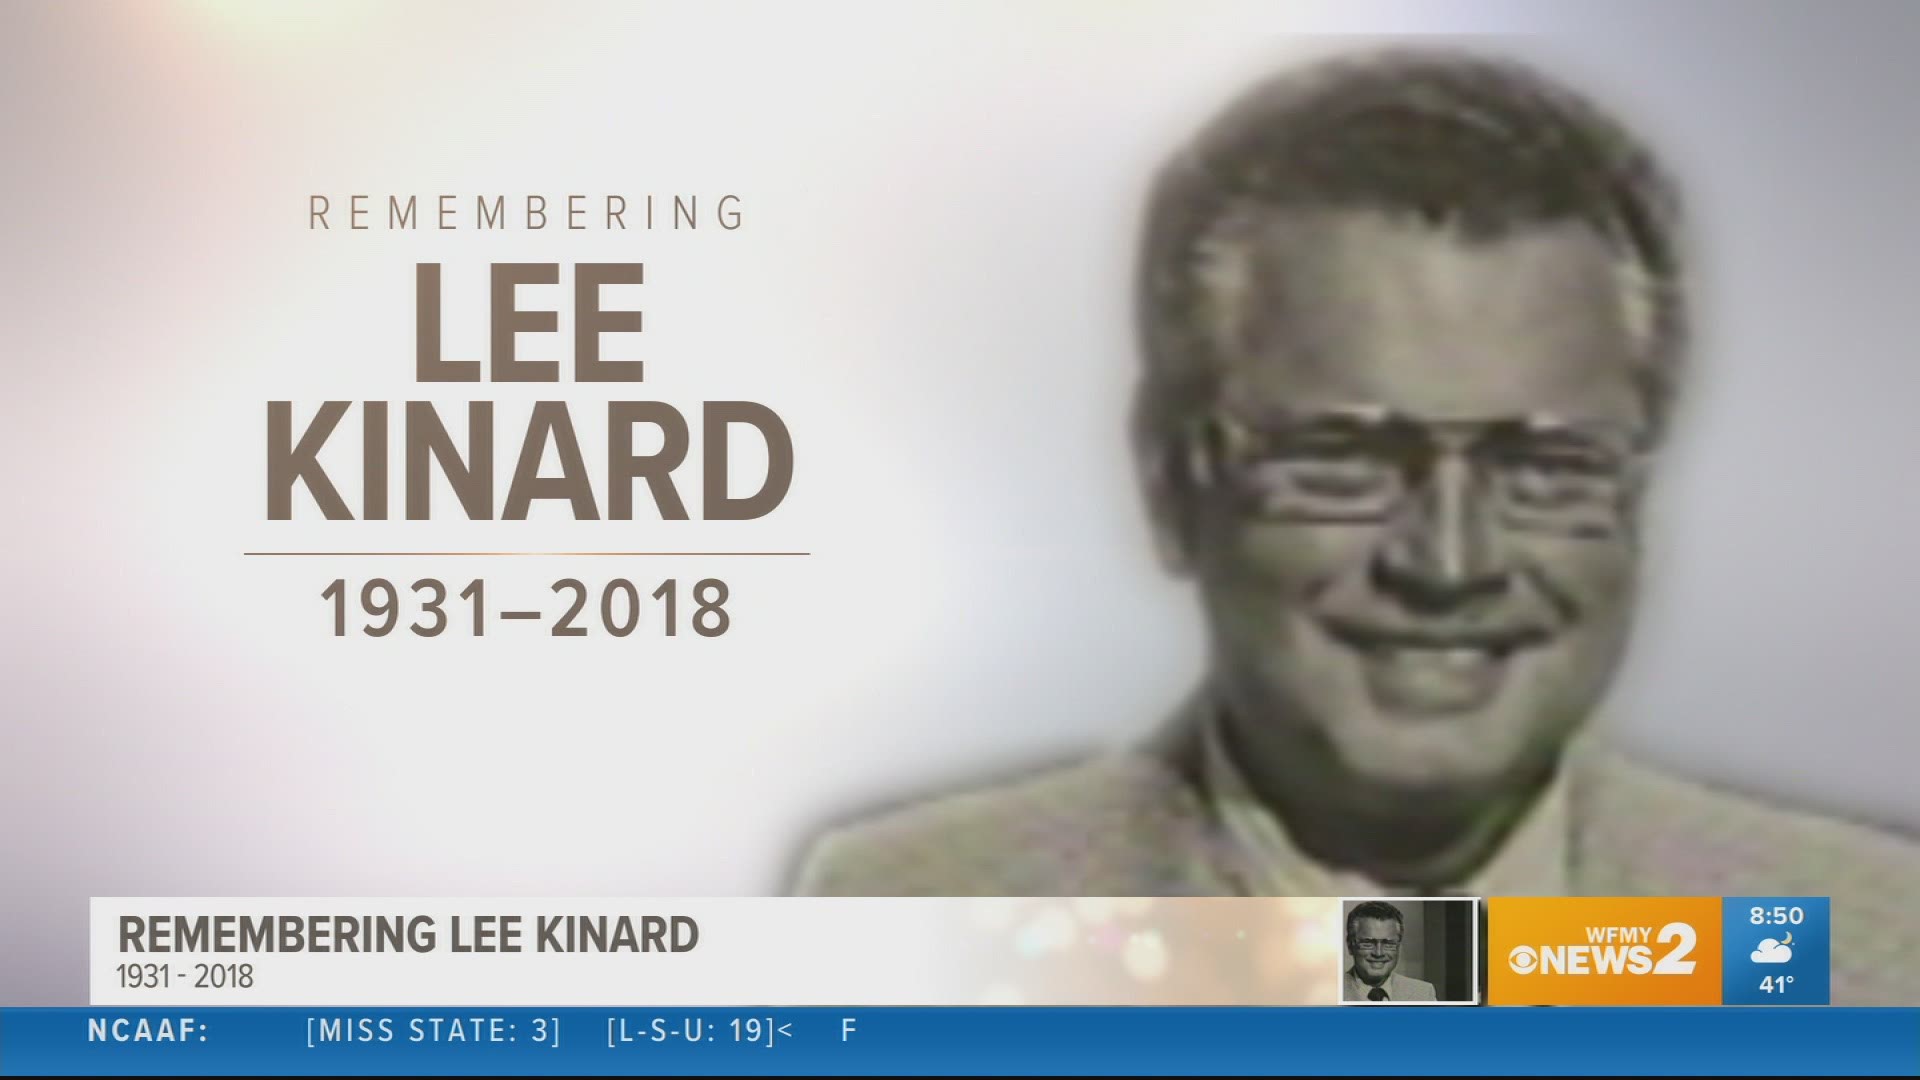 One of the people Lee Kinard was closest to at WFMY was Sandra Hughes. She shares her favorite moments with him.